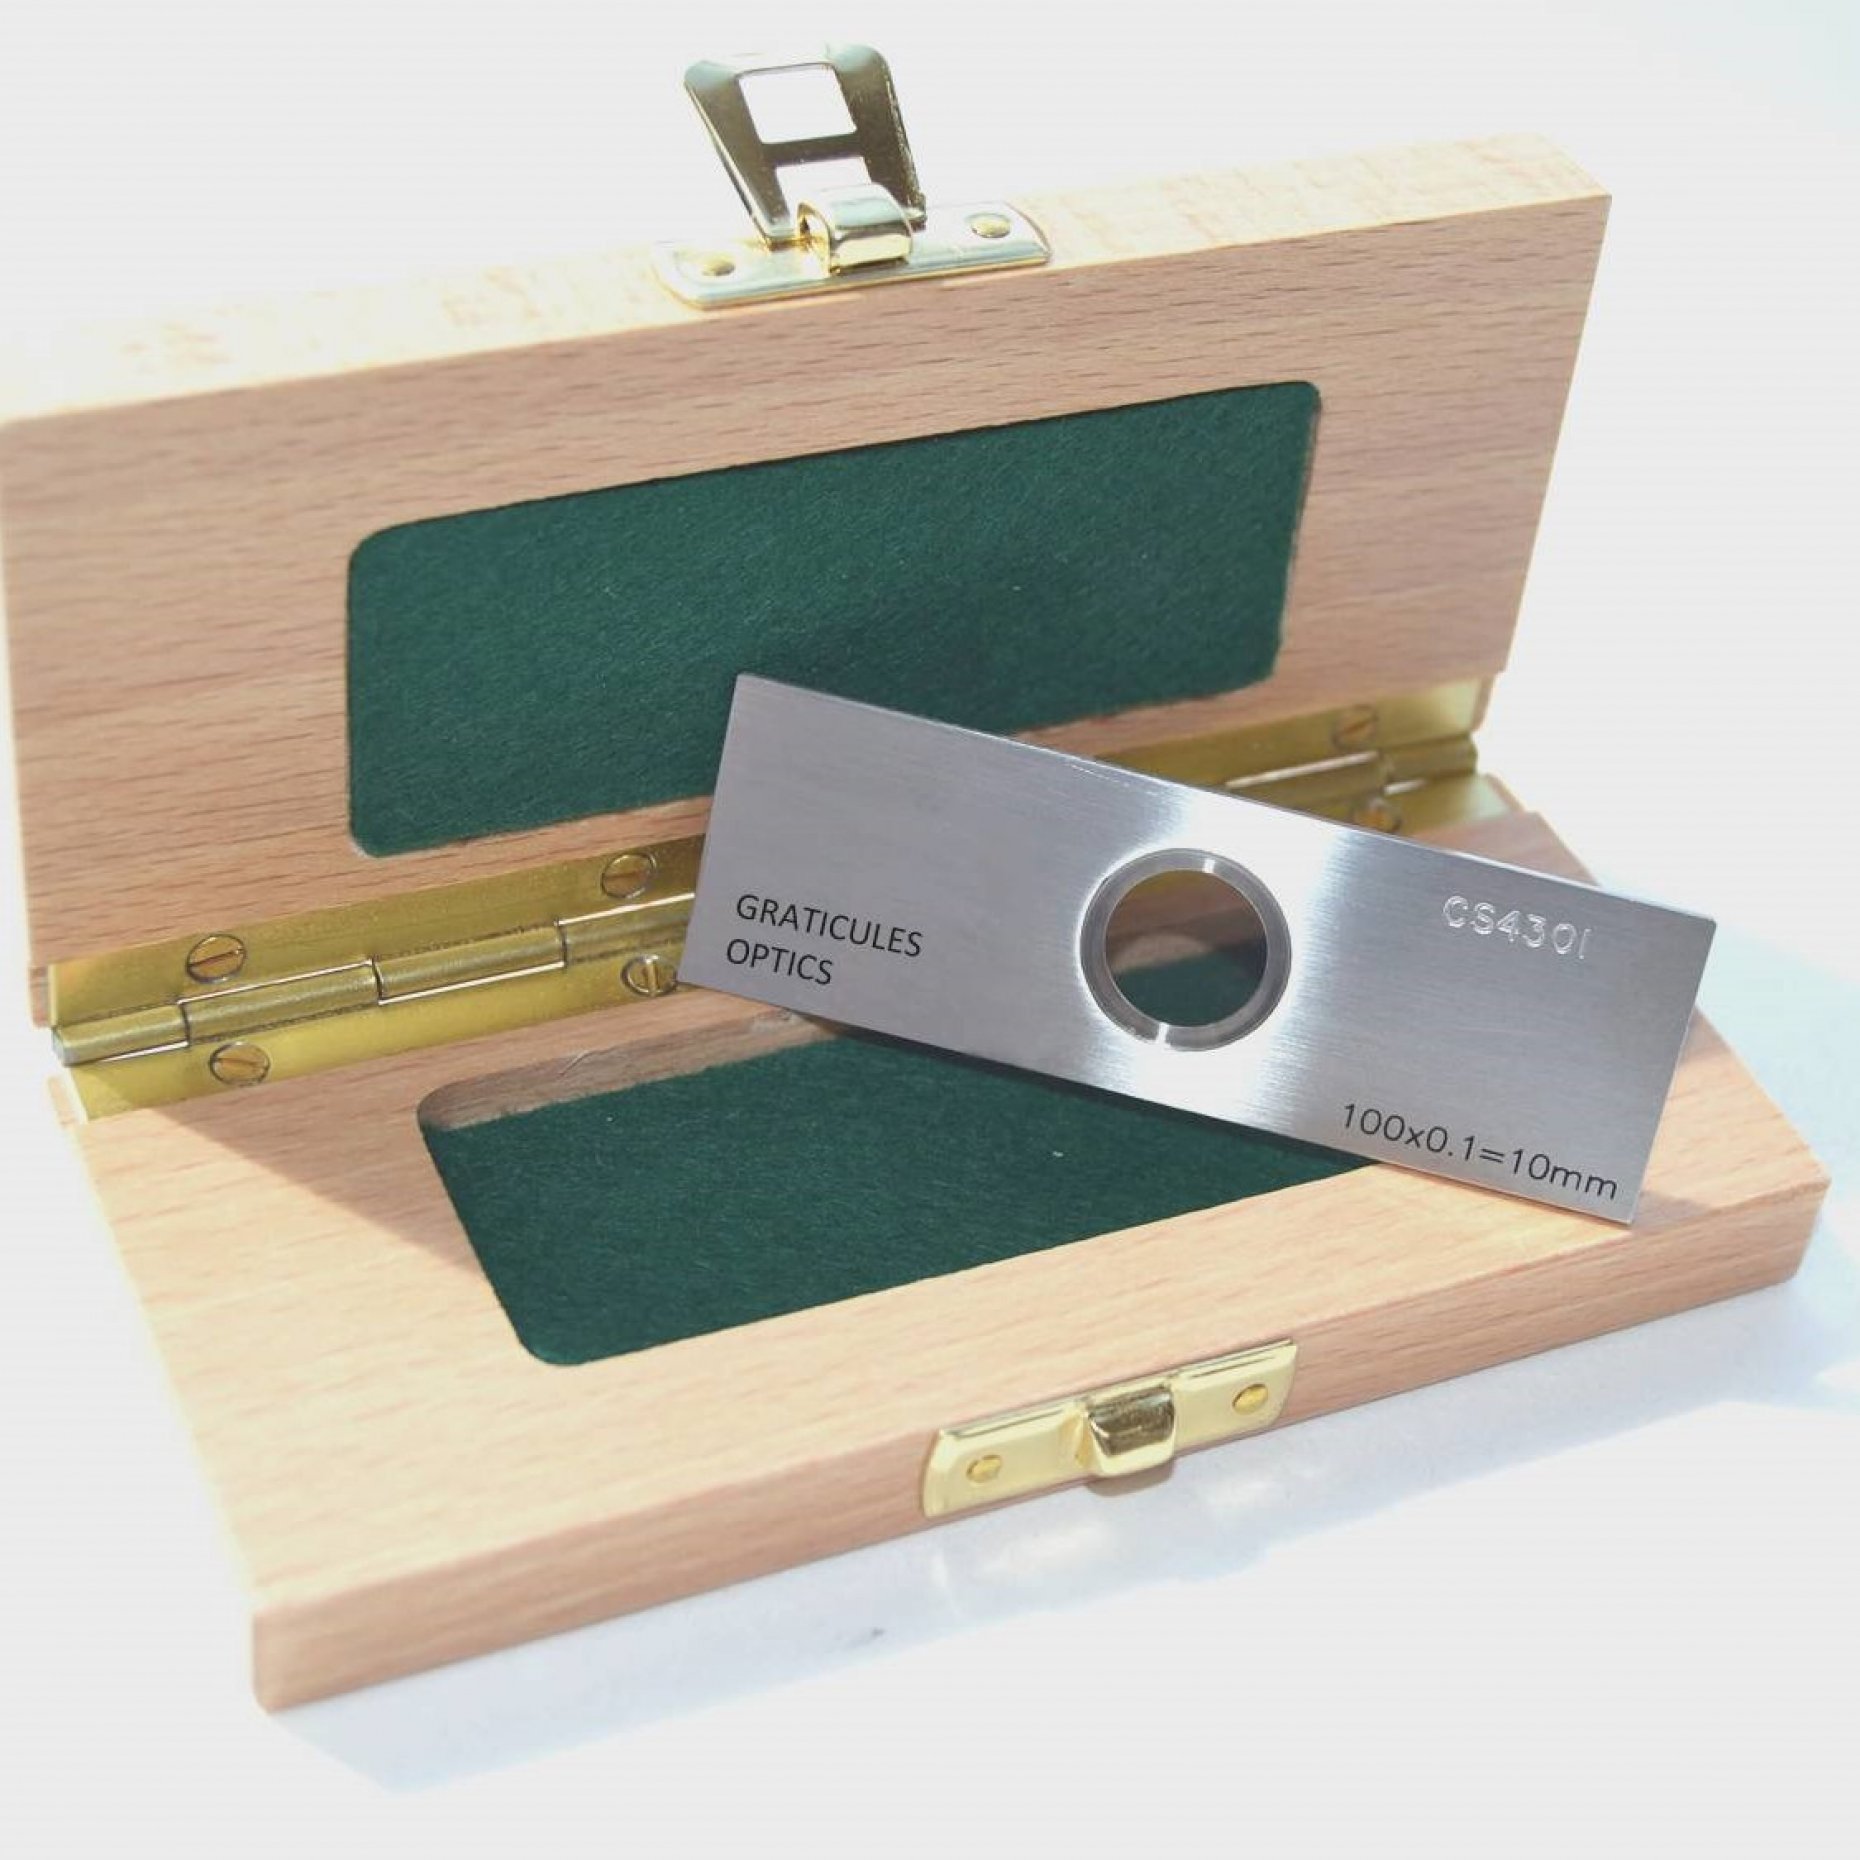 PS1 Stage Micrometer 10mm/0.1mm Product